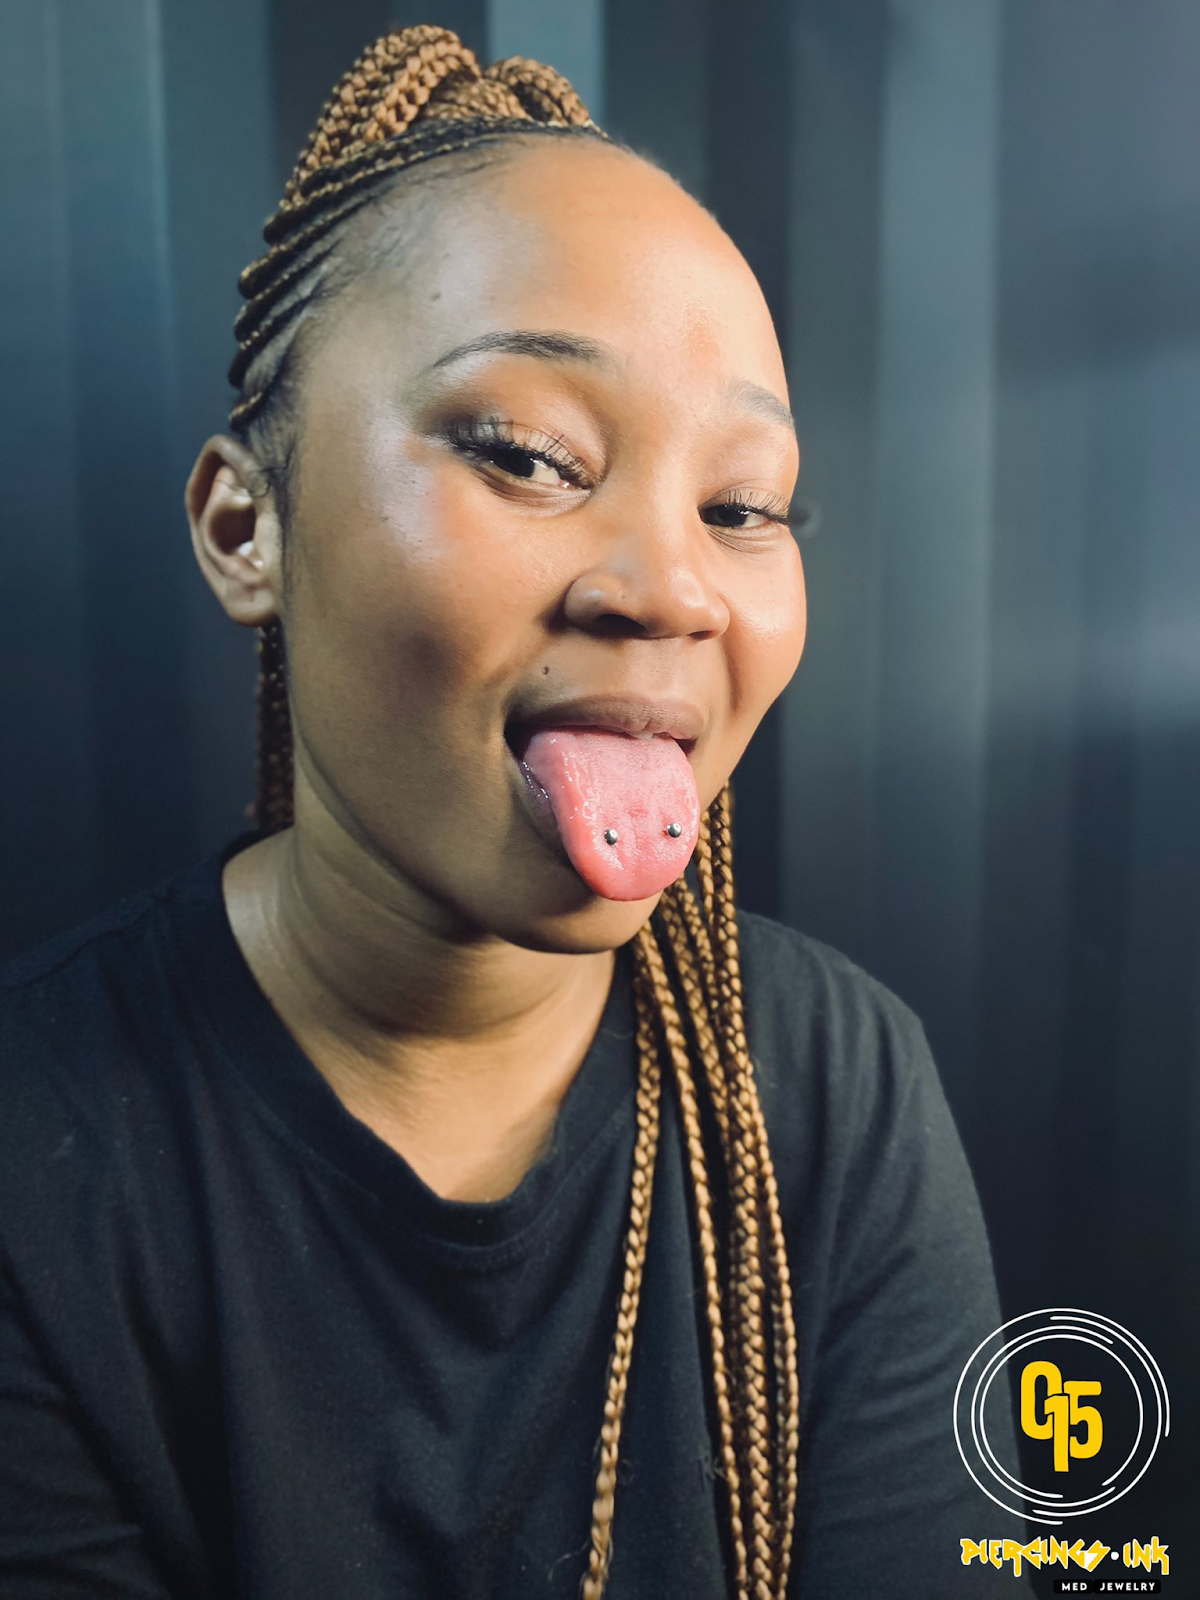 Lady ooses for a selfie with her double tongue piercing